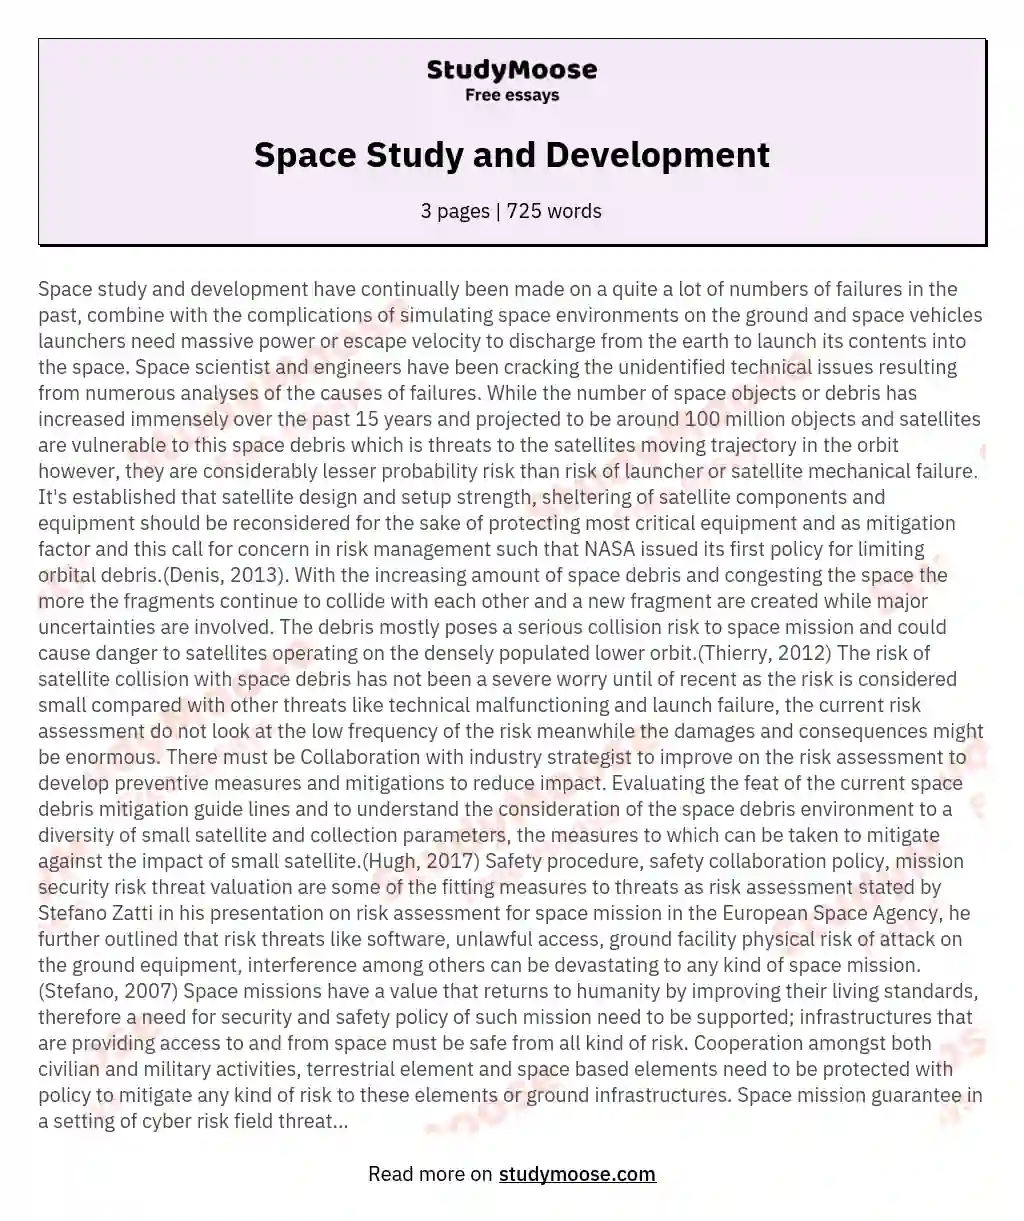 Space Study and Development essay